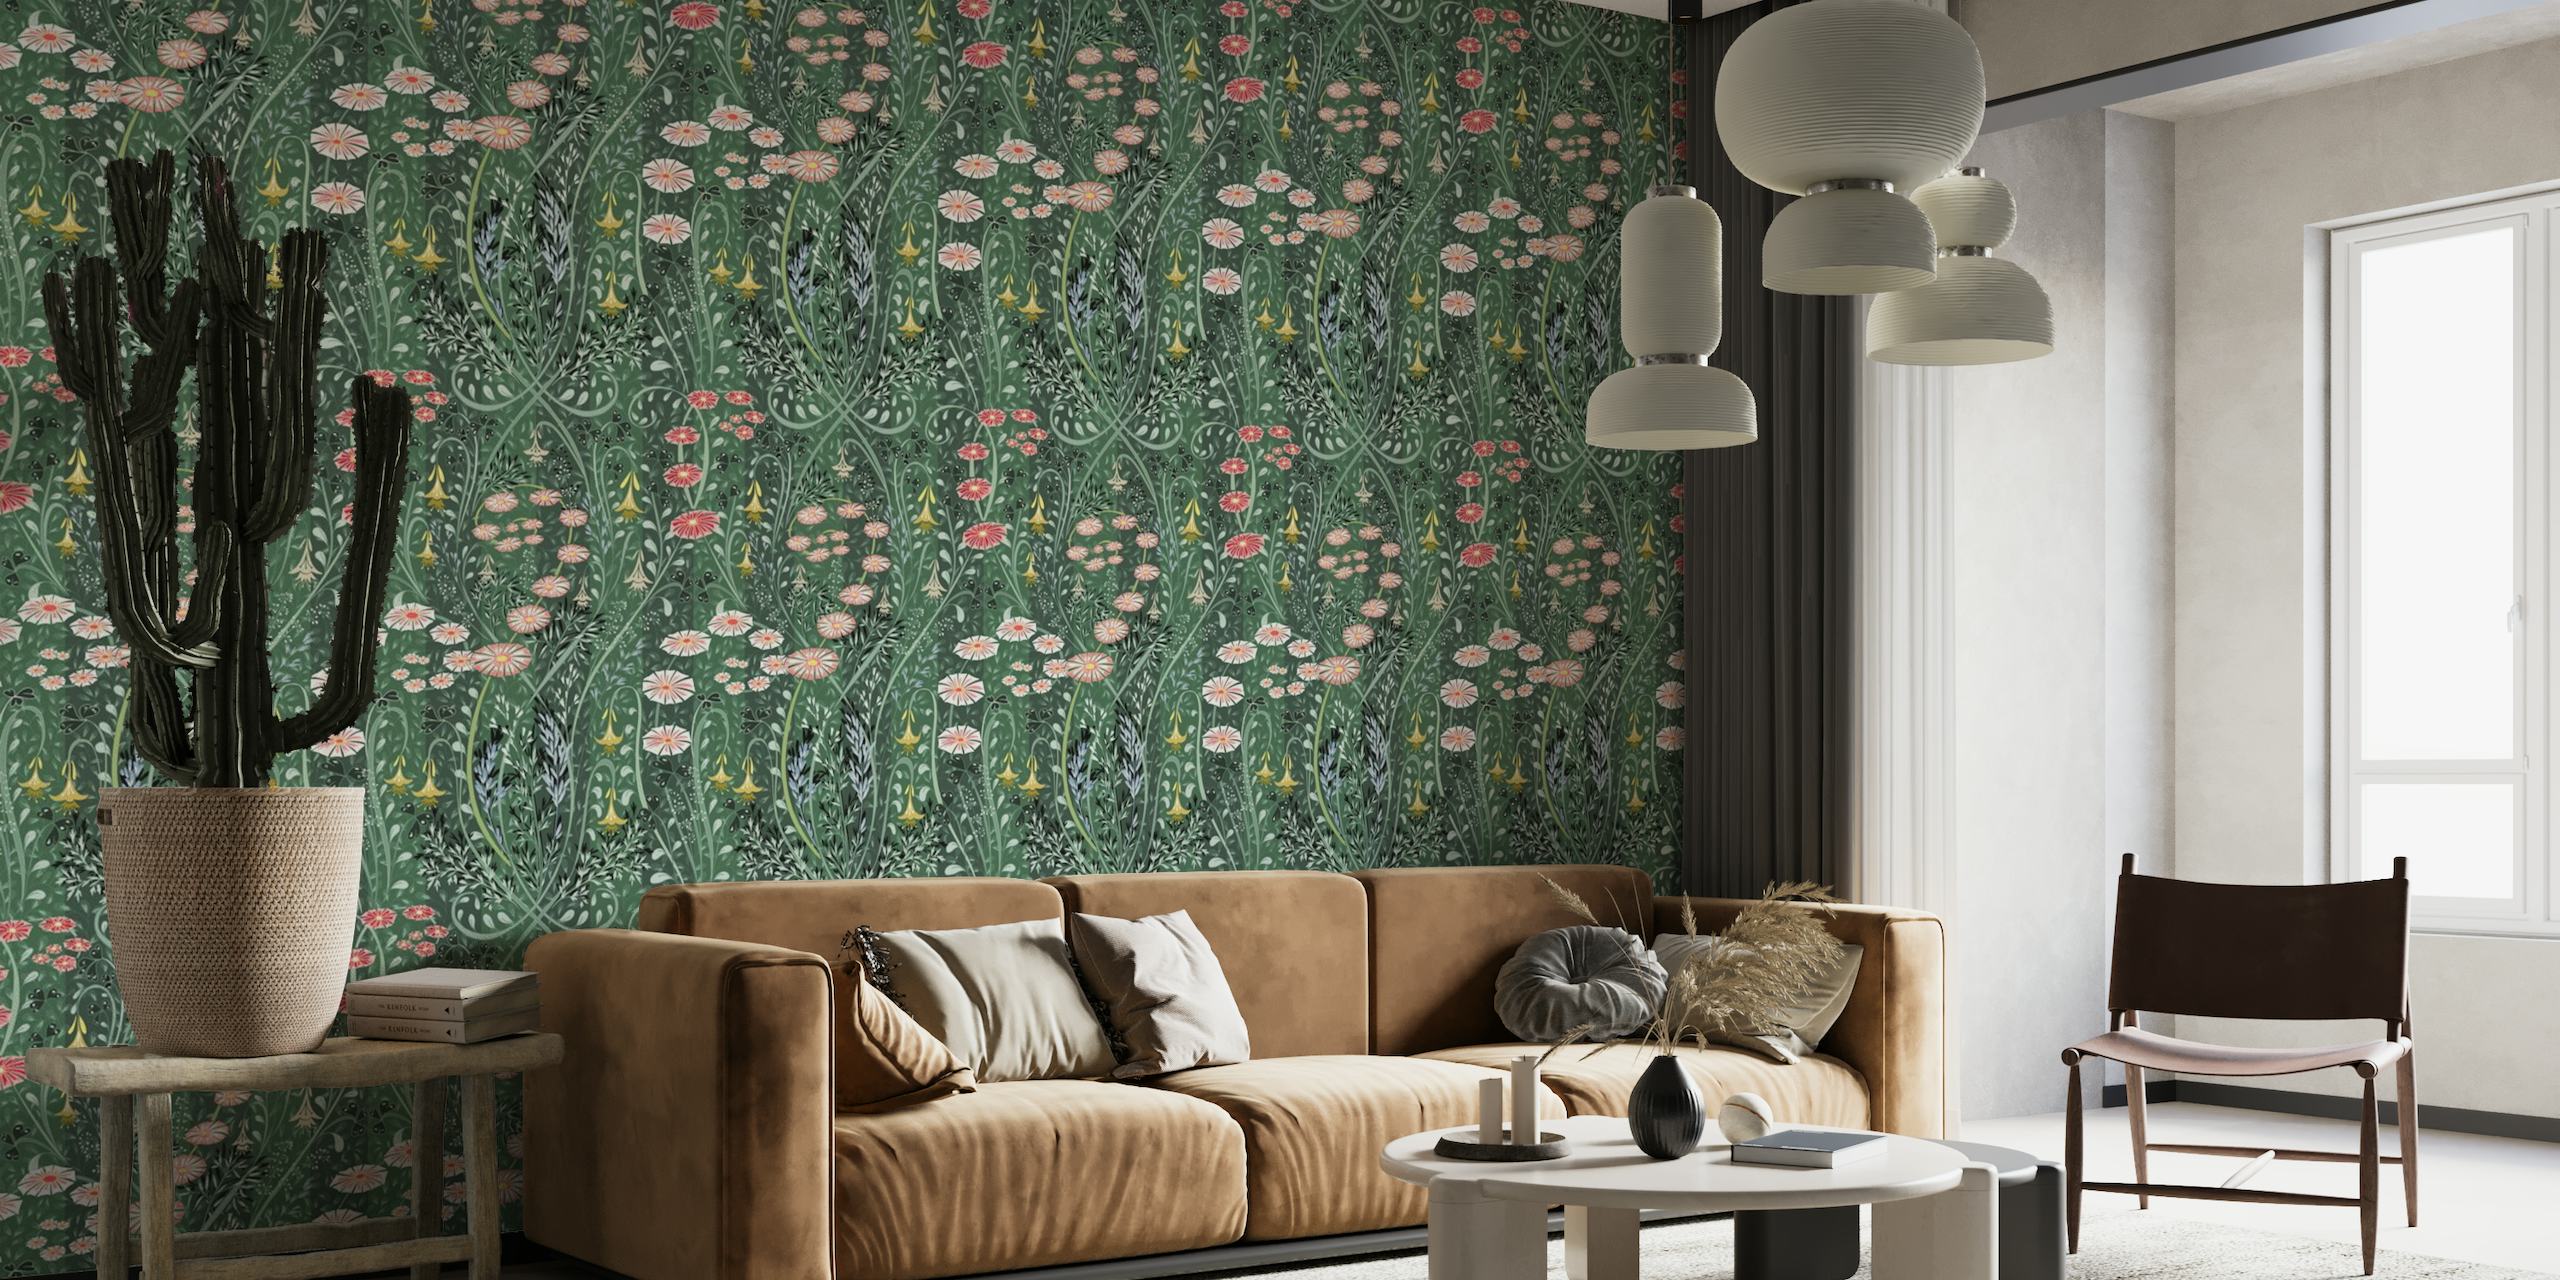 Floral patterned wall mural with a lush green background and colorful meadow flowers